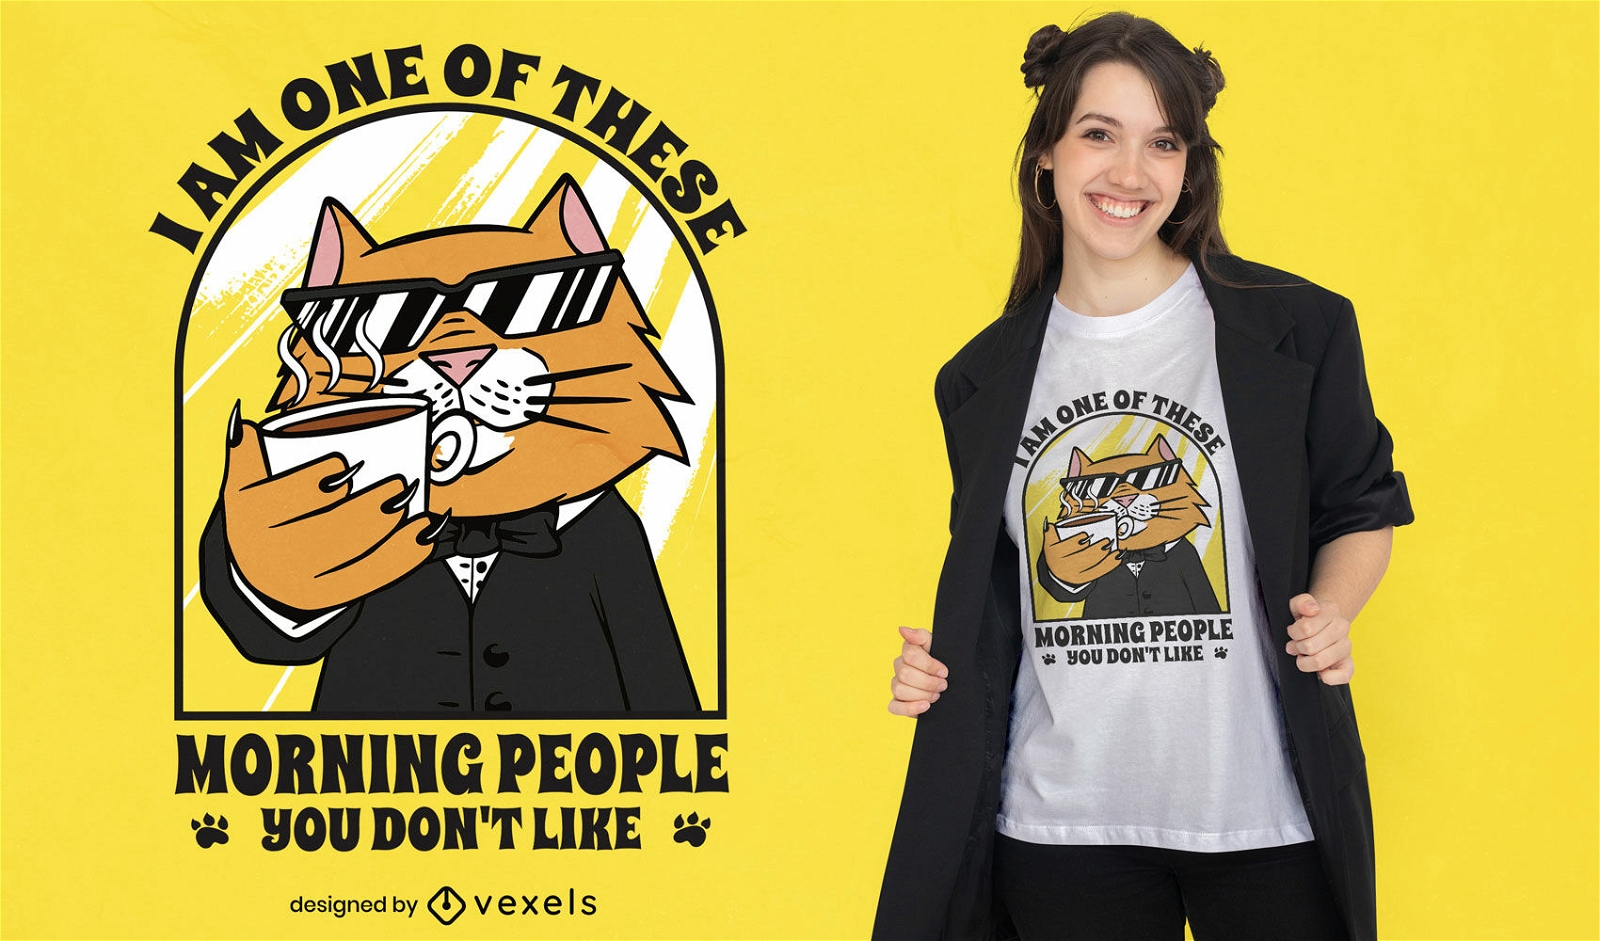 Morning people quote cat t-shirt design